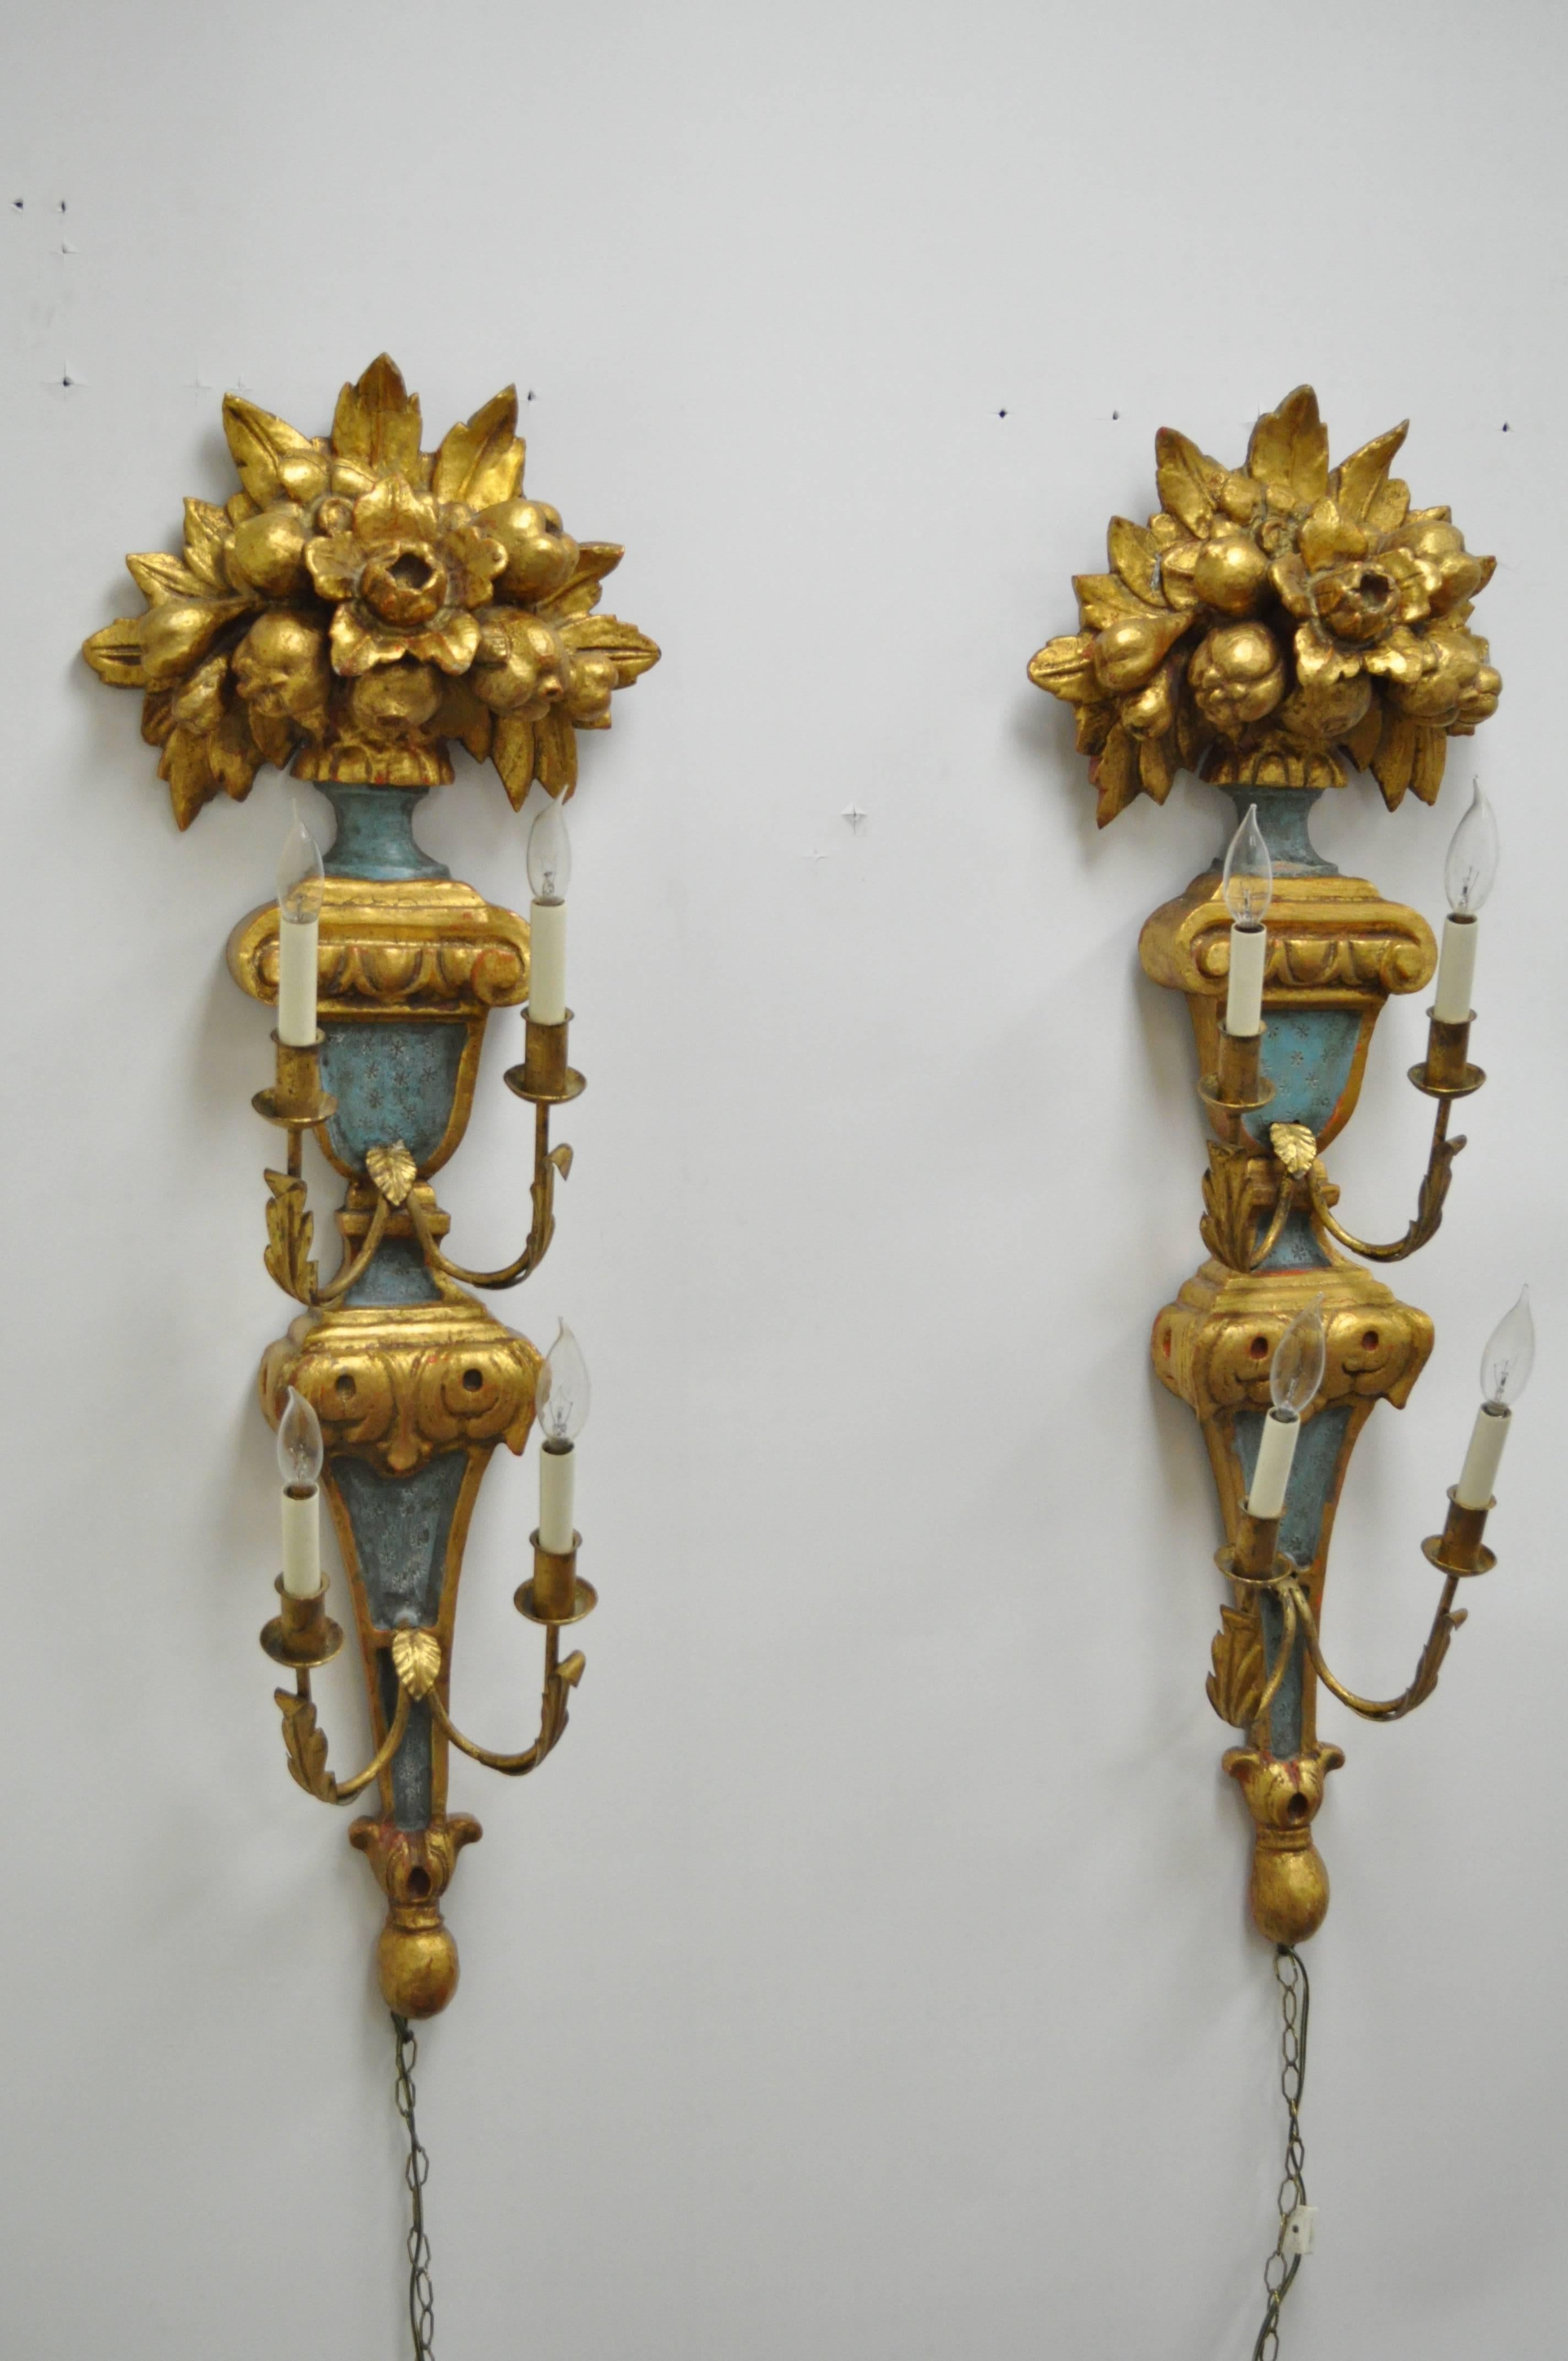 Pair of 1950s carved giltwood Italian style four-light wall sconces, made in Spain by Masa. Item features four iron arms each with four electrified lights, painted and gilt finish, carved wood floral and fruit bouquet toppers and stately size and